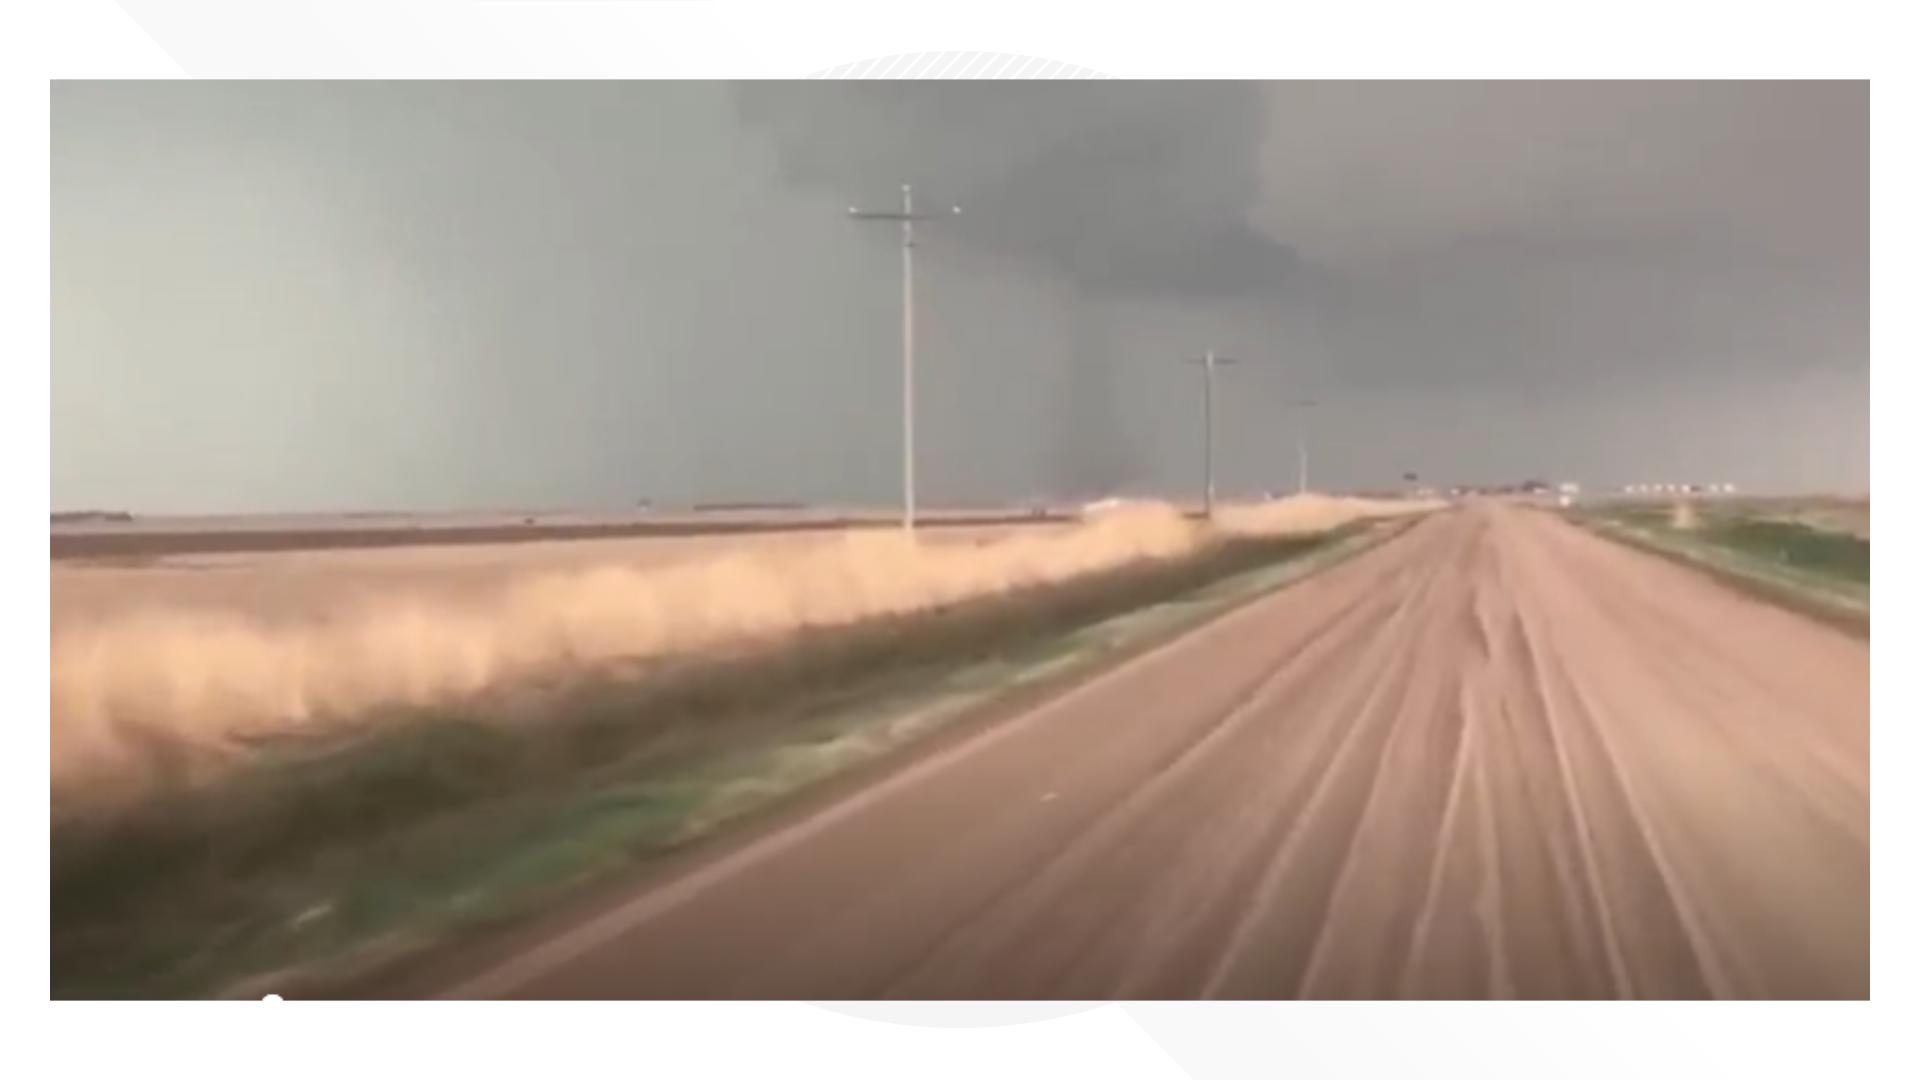 9NEWS meteorologist Cory Reppenhagen captured a tornado that touched down in Yuma County around 5:17 p.m. on Thursday, April 25.